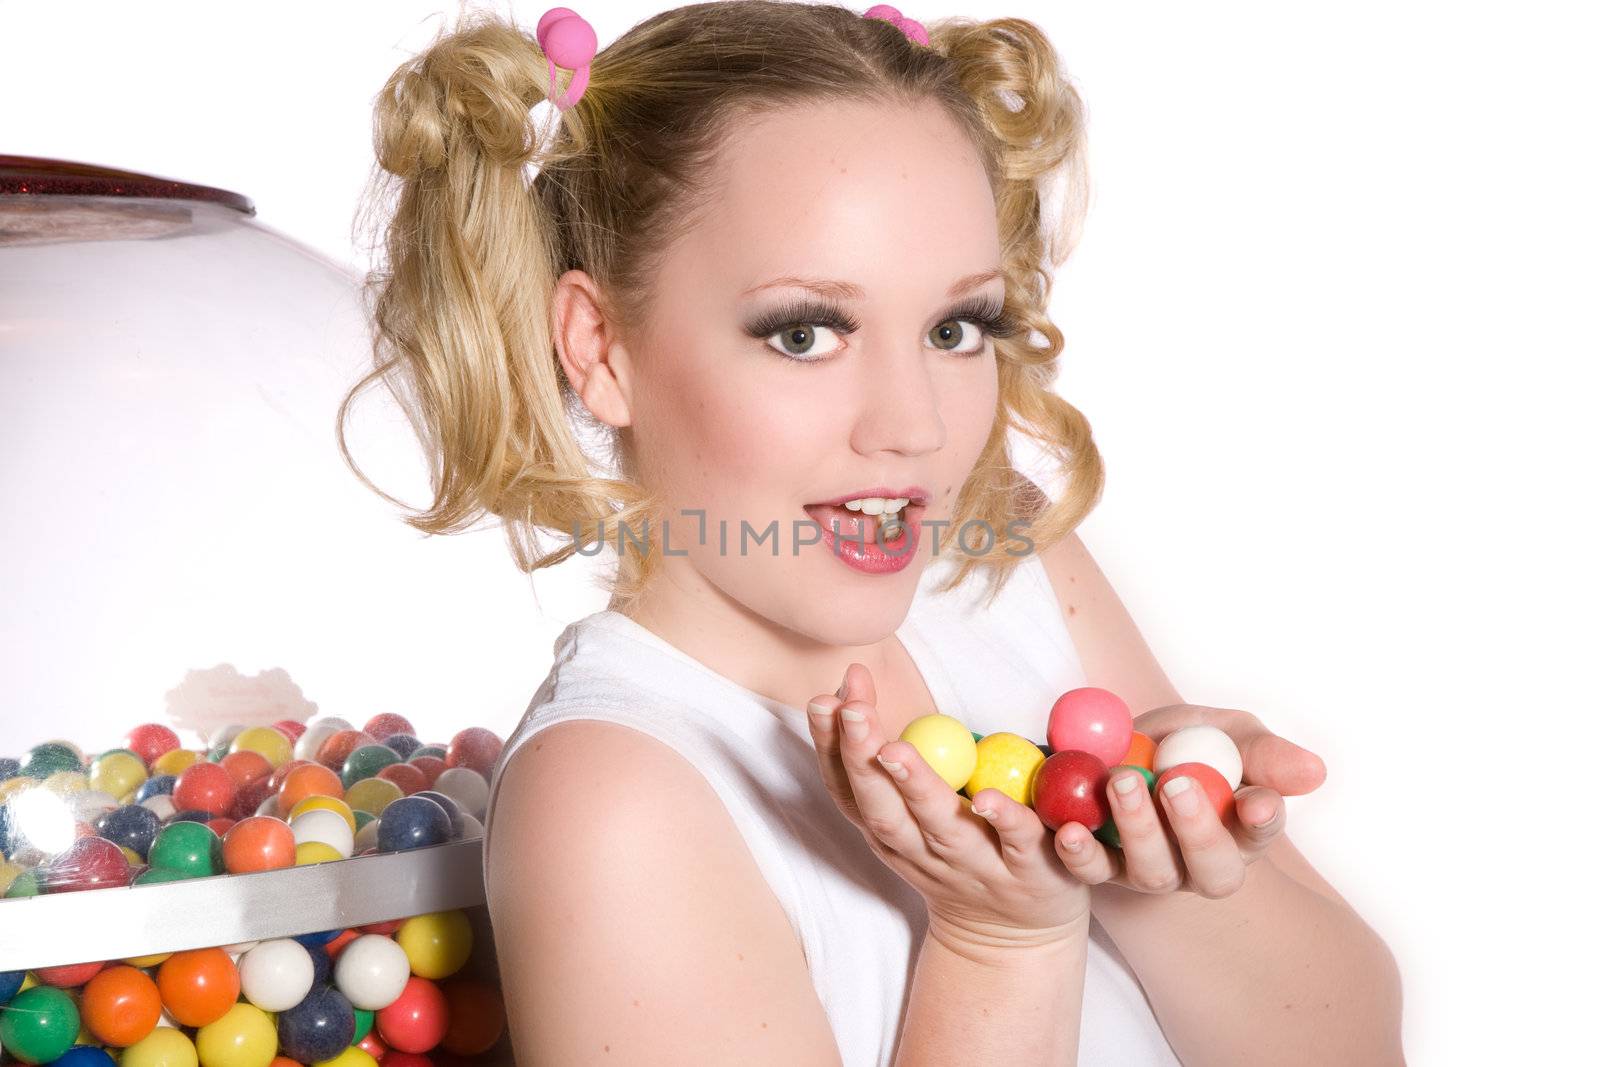 Cute schoolgirl with ponytails and her hands full of chewing gum balls